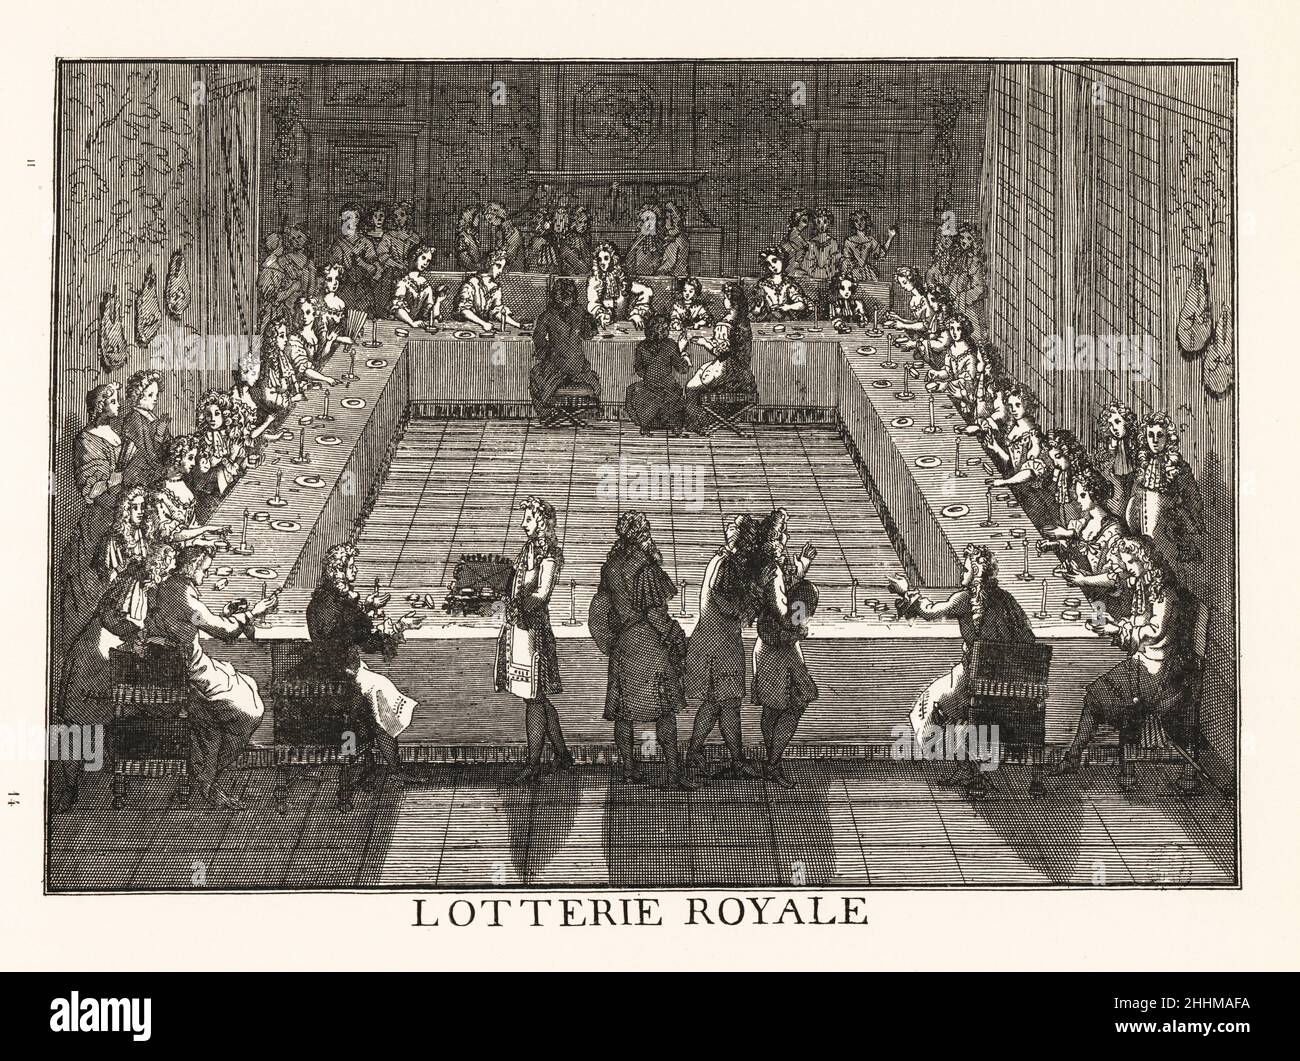 King Louis XIV holding the royal lottery as part of his wedding celebrations in 1660. Courtiers sit at a square table in a large hall by candlelight. Lotterie royale. Lithograph after a 17th-century engraving from Henry Rene d’Allemagne’s Recreations et Passe-Temps, Games and Pastimes, Hachette, Paris, 1906. Stock Photo